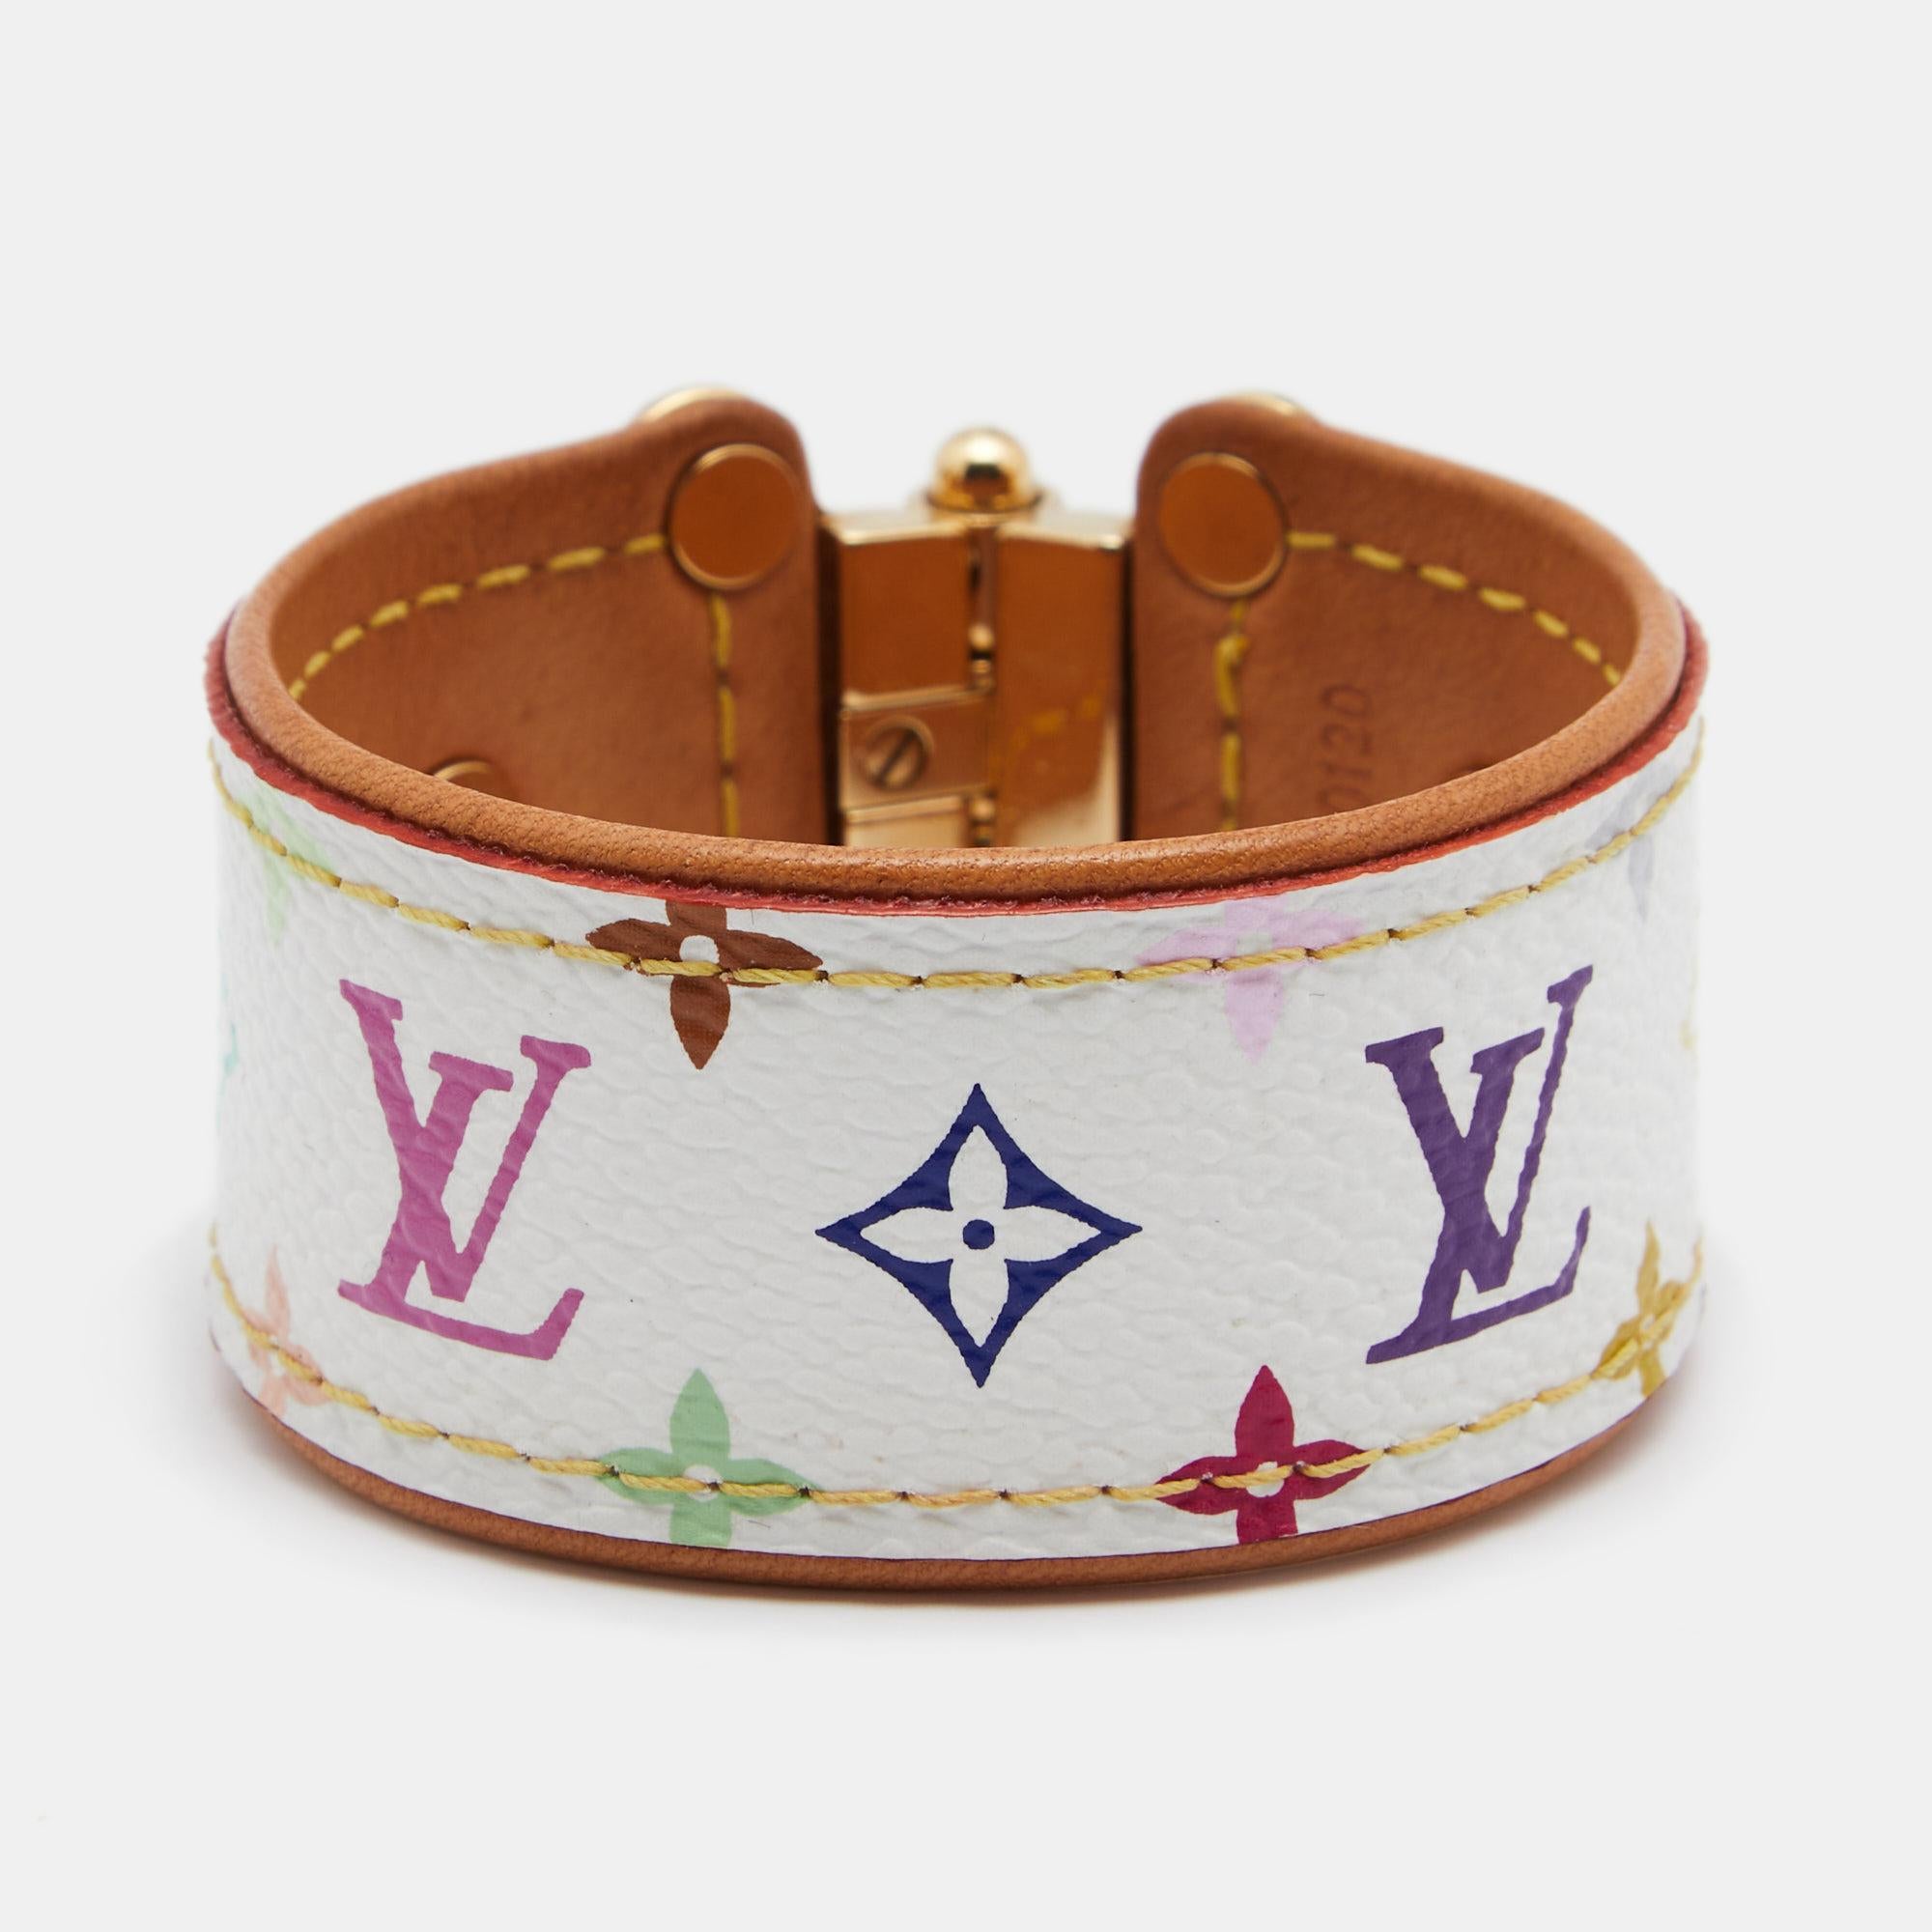 To accompany all your outings, day in and day out, Louis Vuitton brings you this gorgeous bracelet that has been made from multicolore monogram canvas and leather. The bracelet is complete with the signature S lock inspired by iconic LV trunks.

